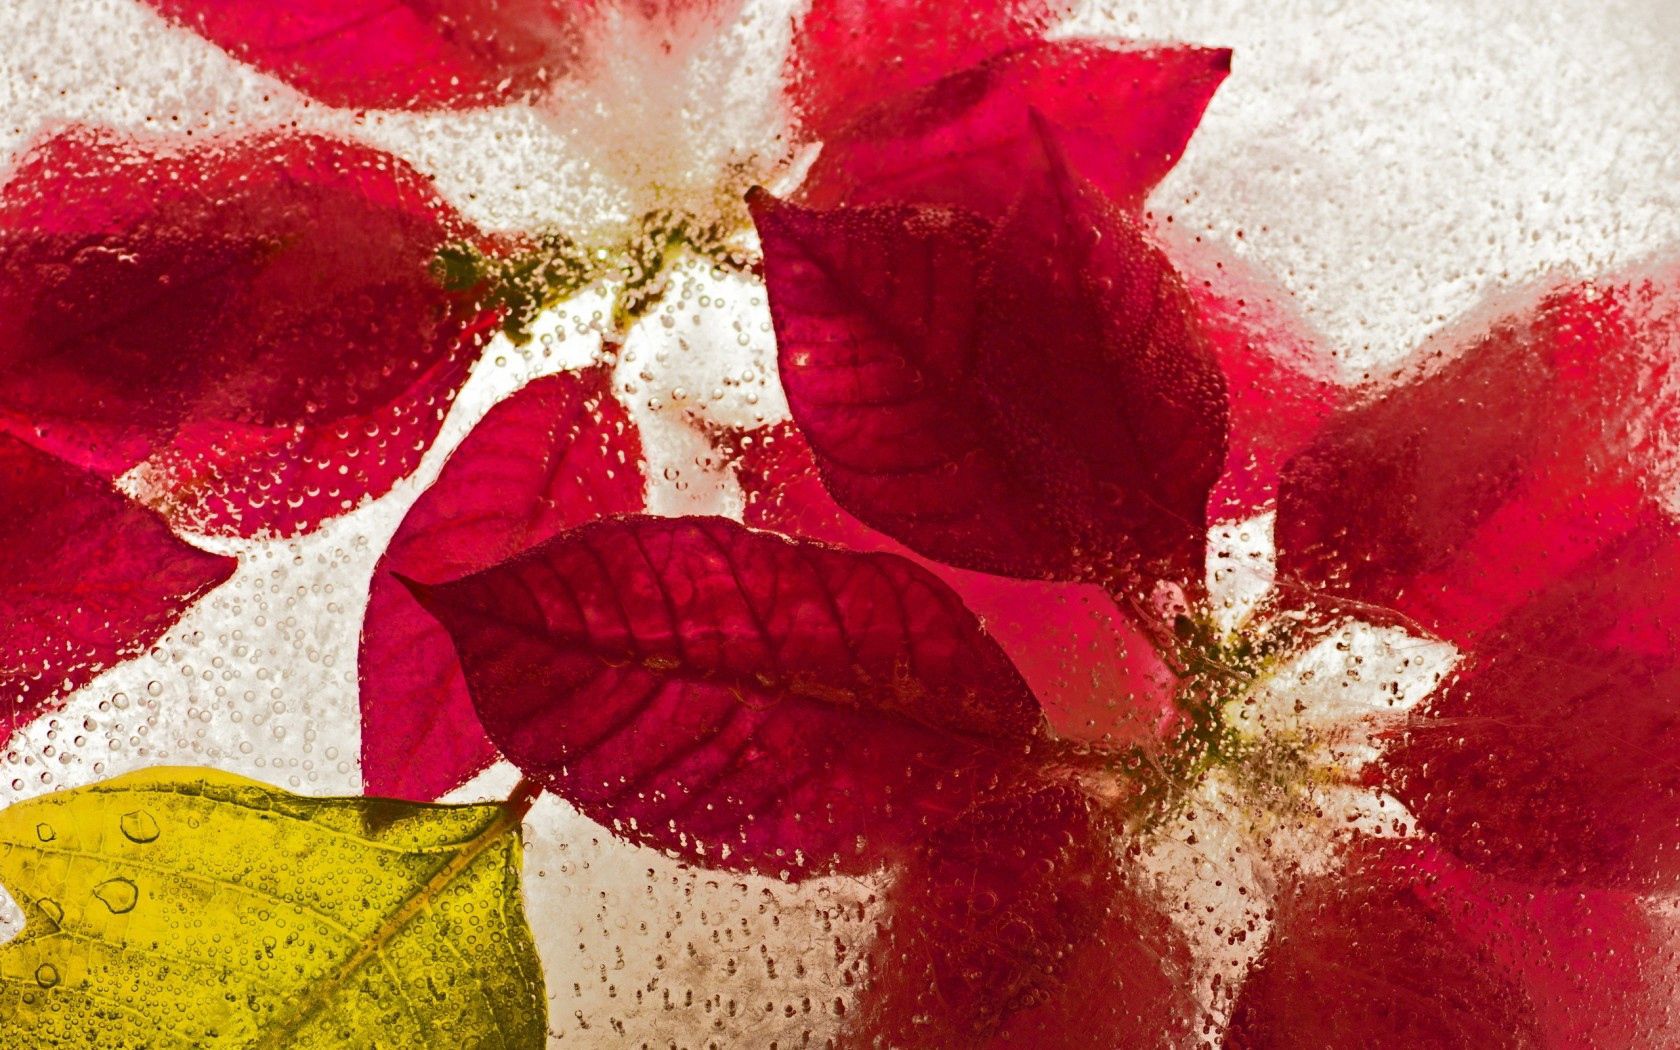 68695 download wallpaper flowers, ice, drops, macro screensavers and pictures for free